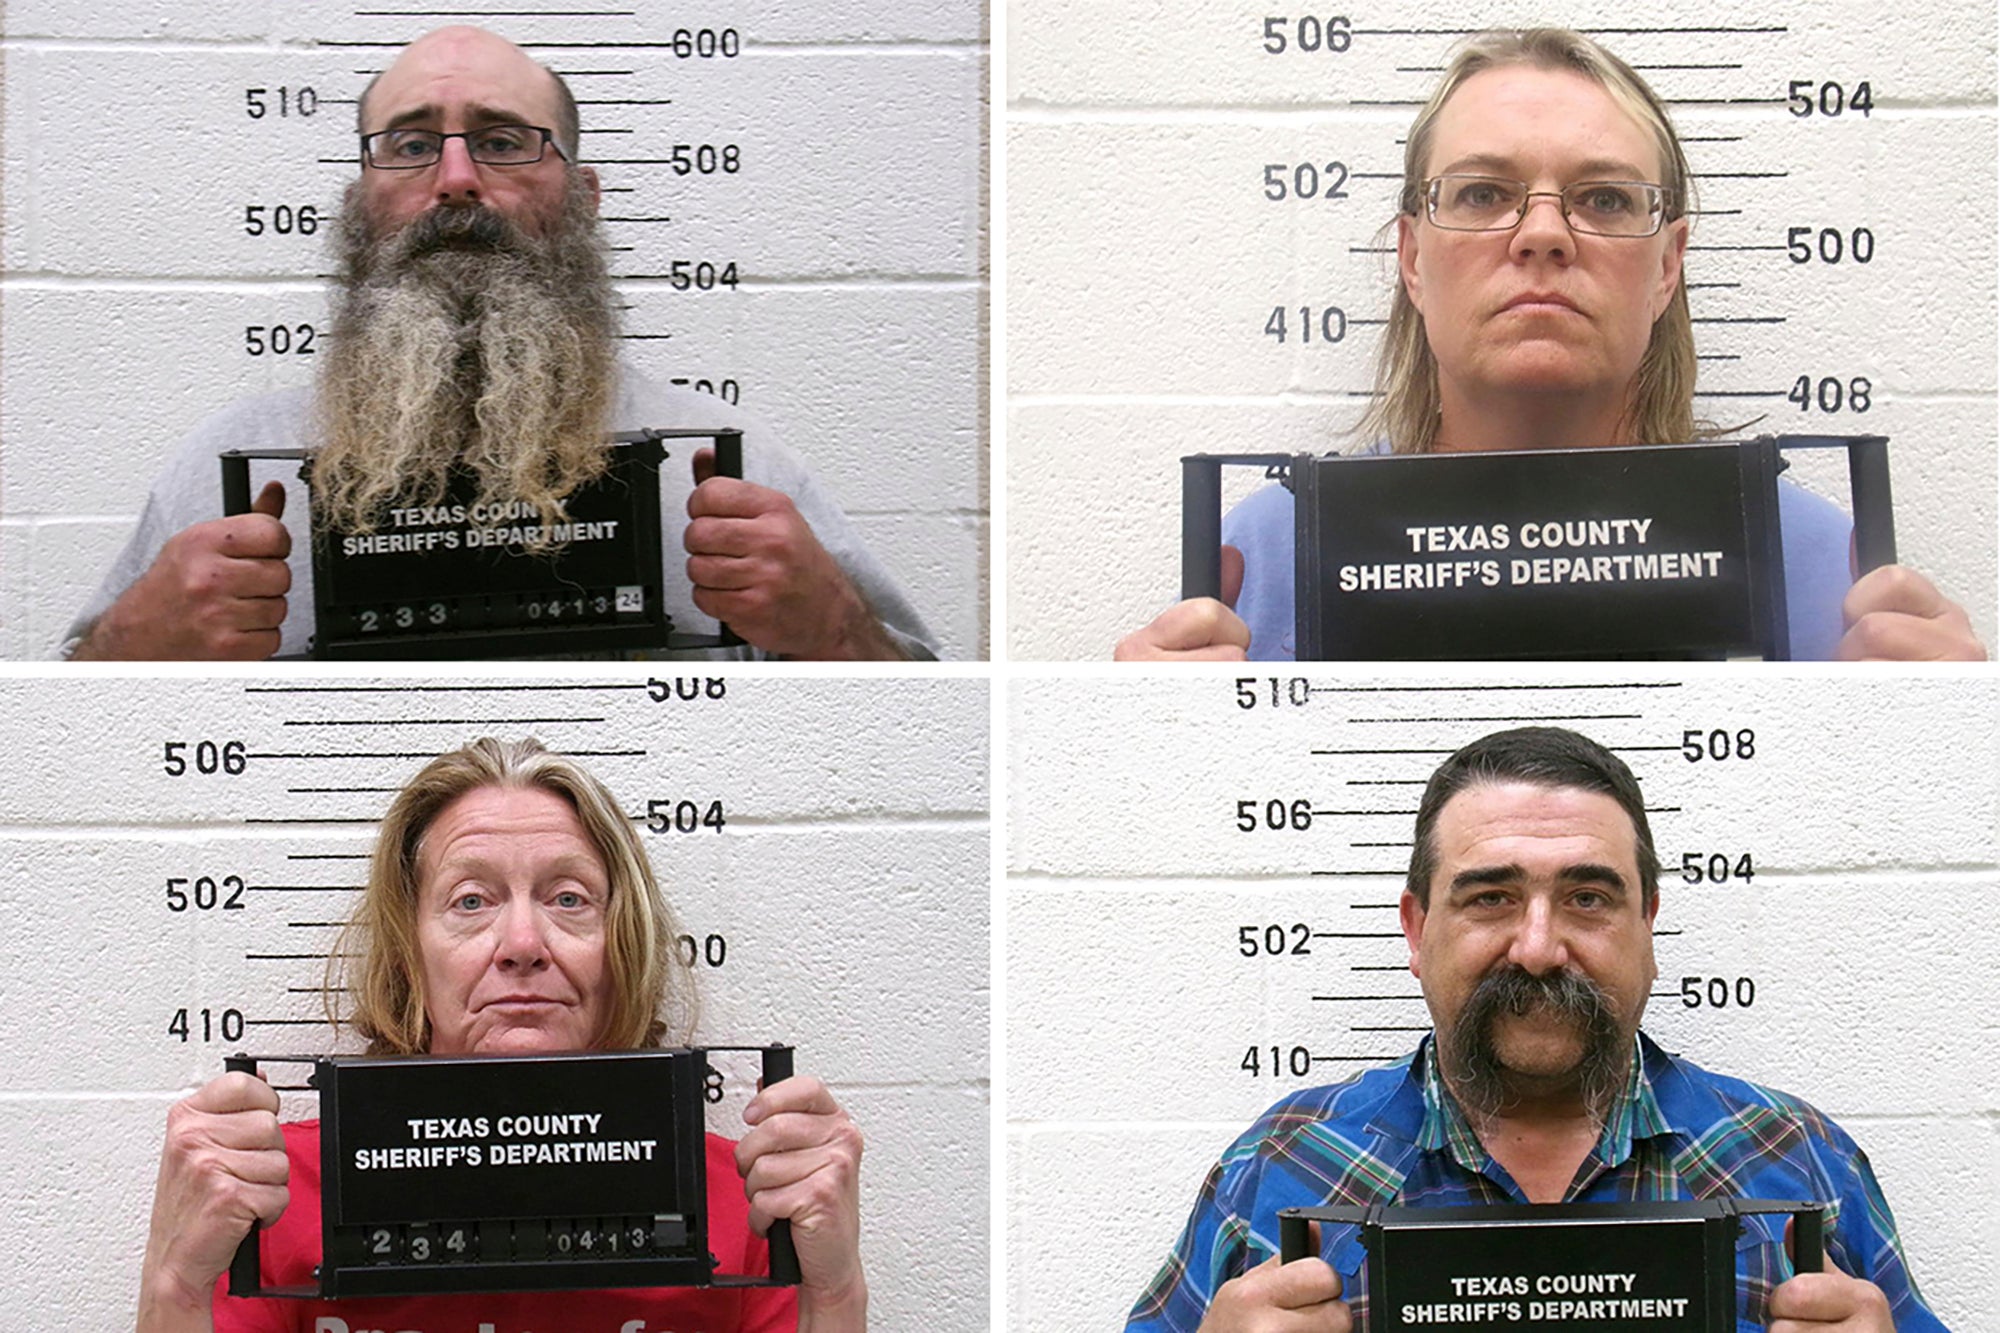 Clockwise from top left: Tad Bert Cullum, 43, Cora Twombly, 44, Tifany Machel Adams, 54, and Cole Earl Twombly, 50, were arrested and charged with murder